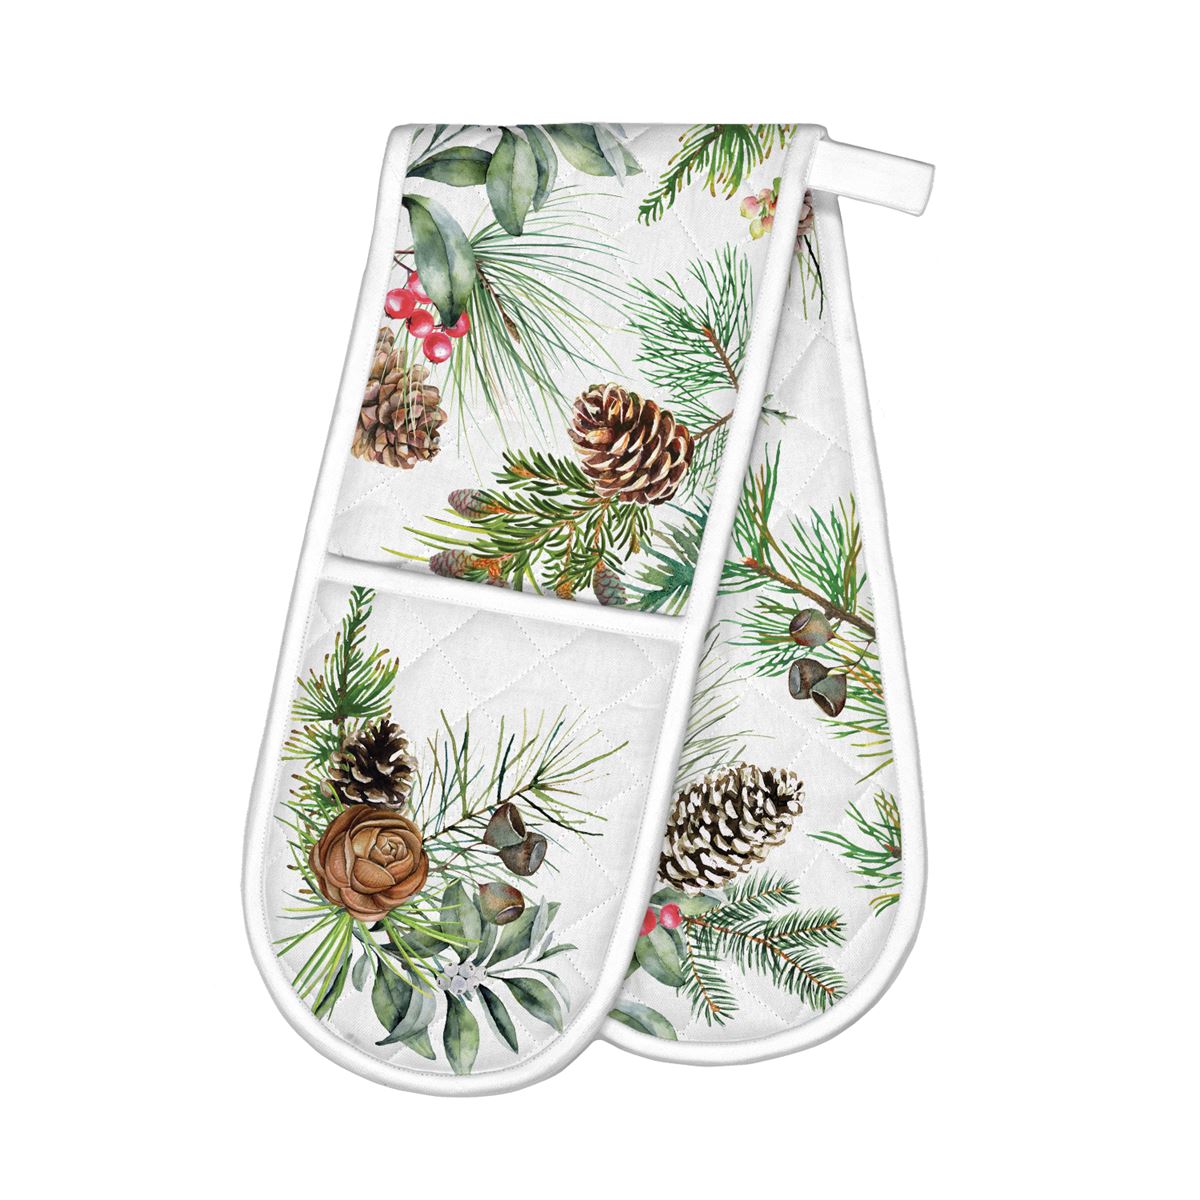 White Spruce Double Oven Glove Stylish and Protective Kitchen Accessory